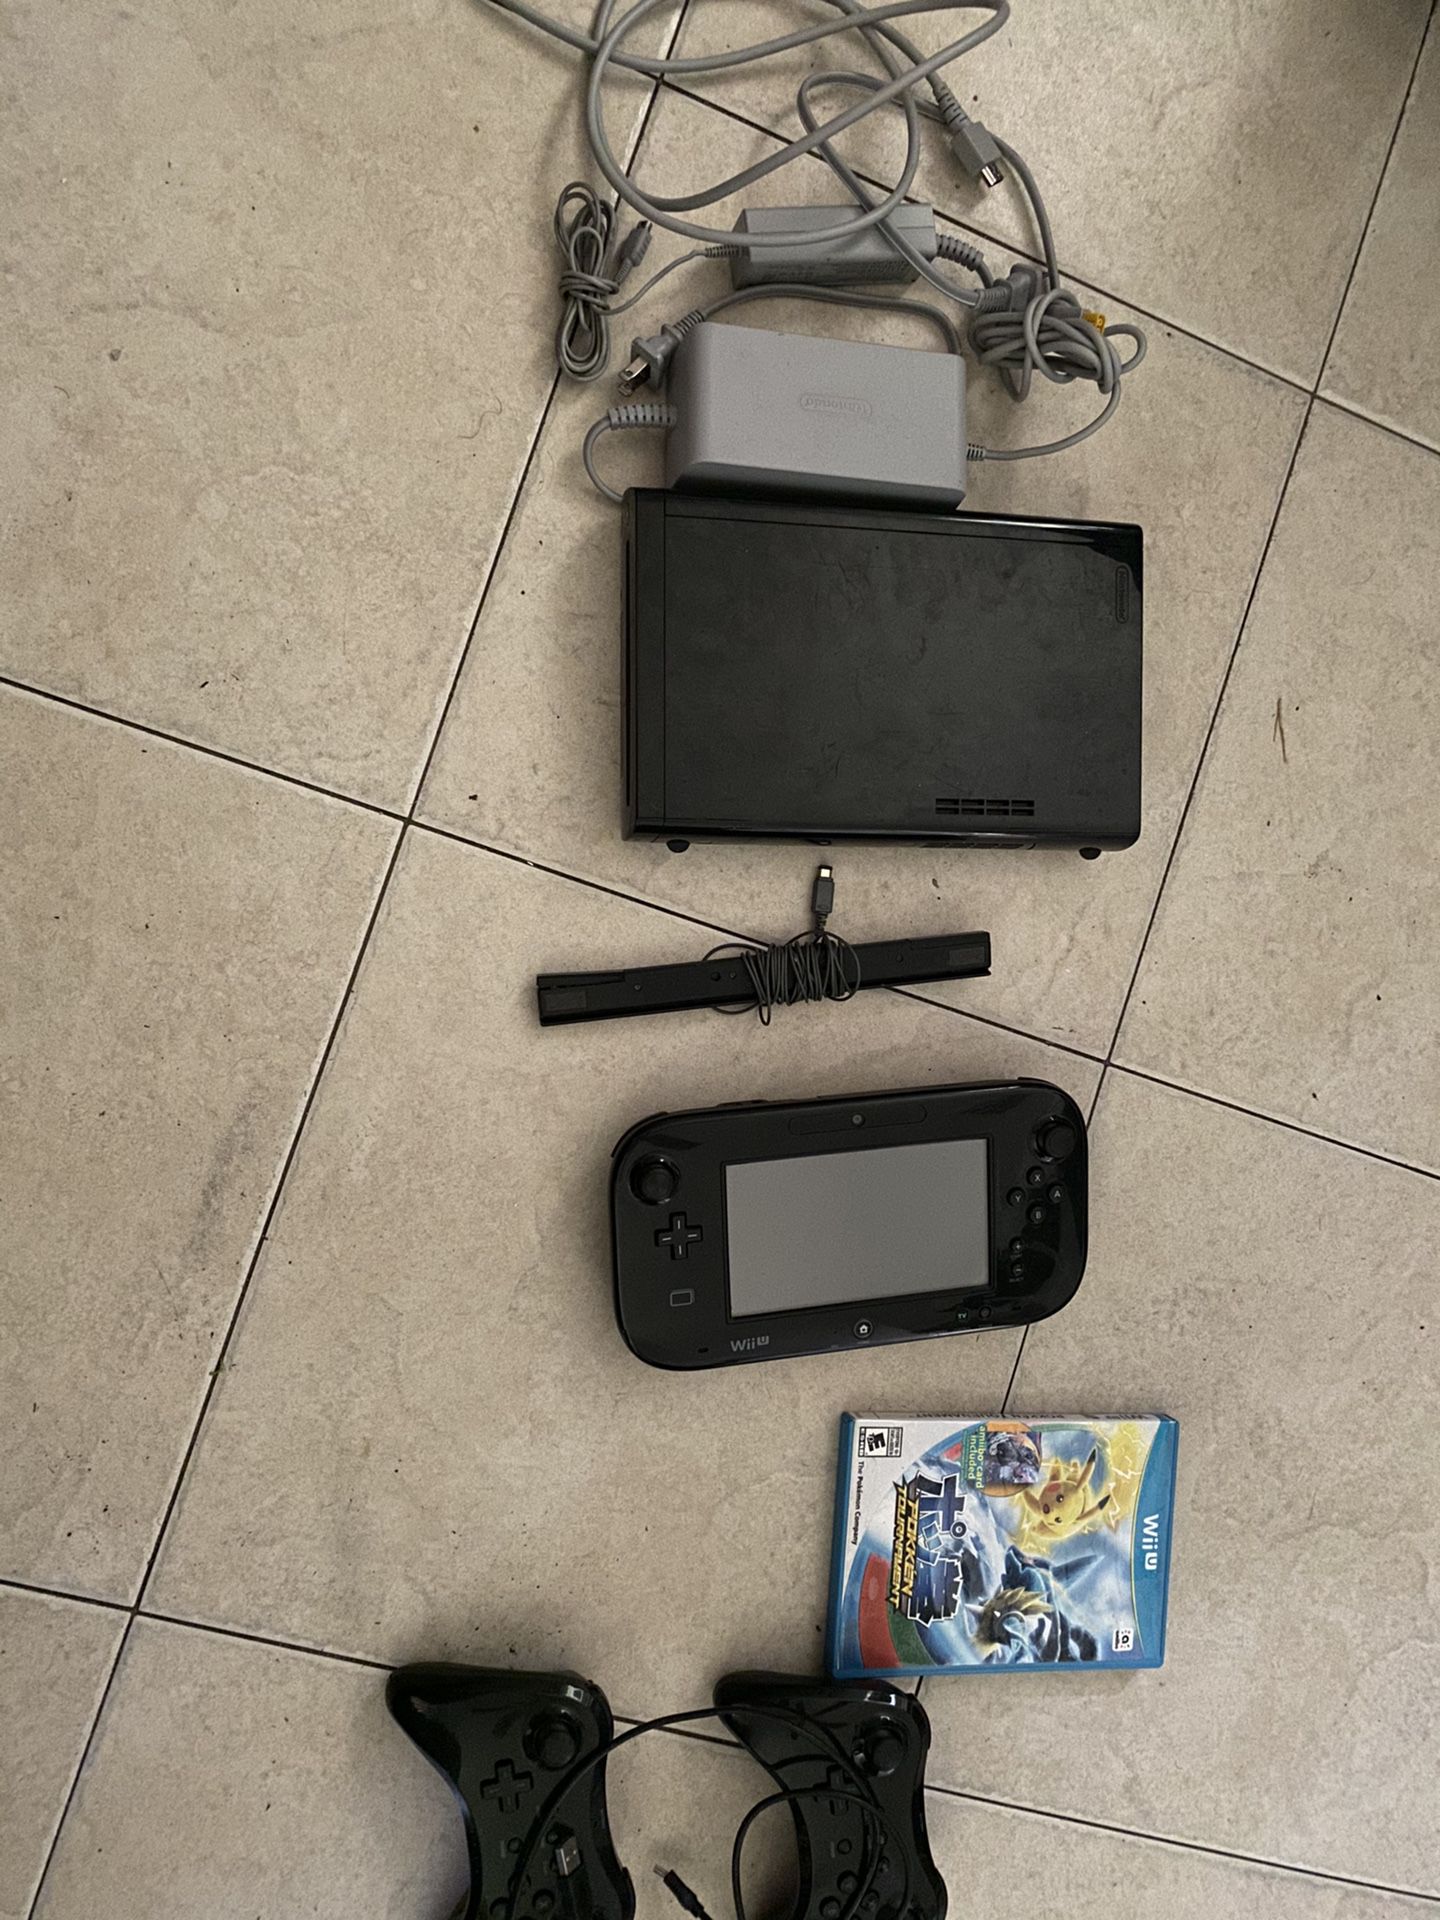 Nintendo Wii U system in good condition with two extra controllers and as game